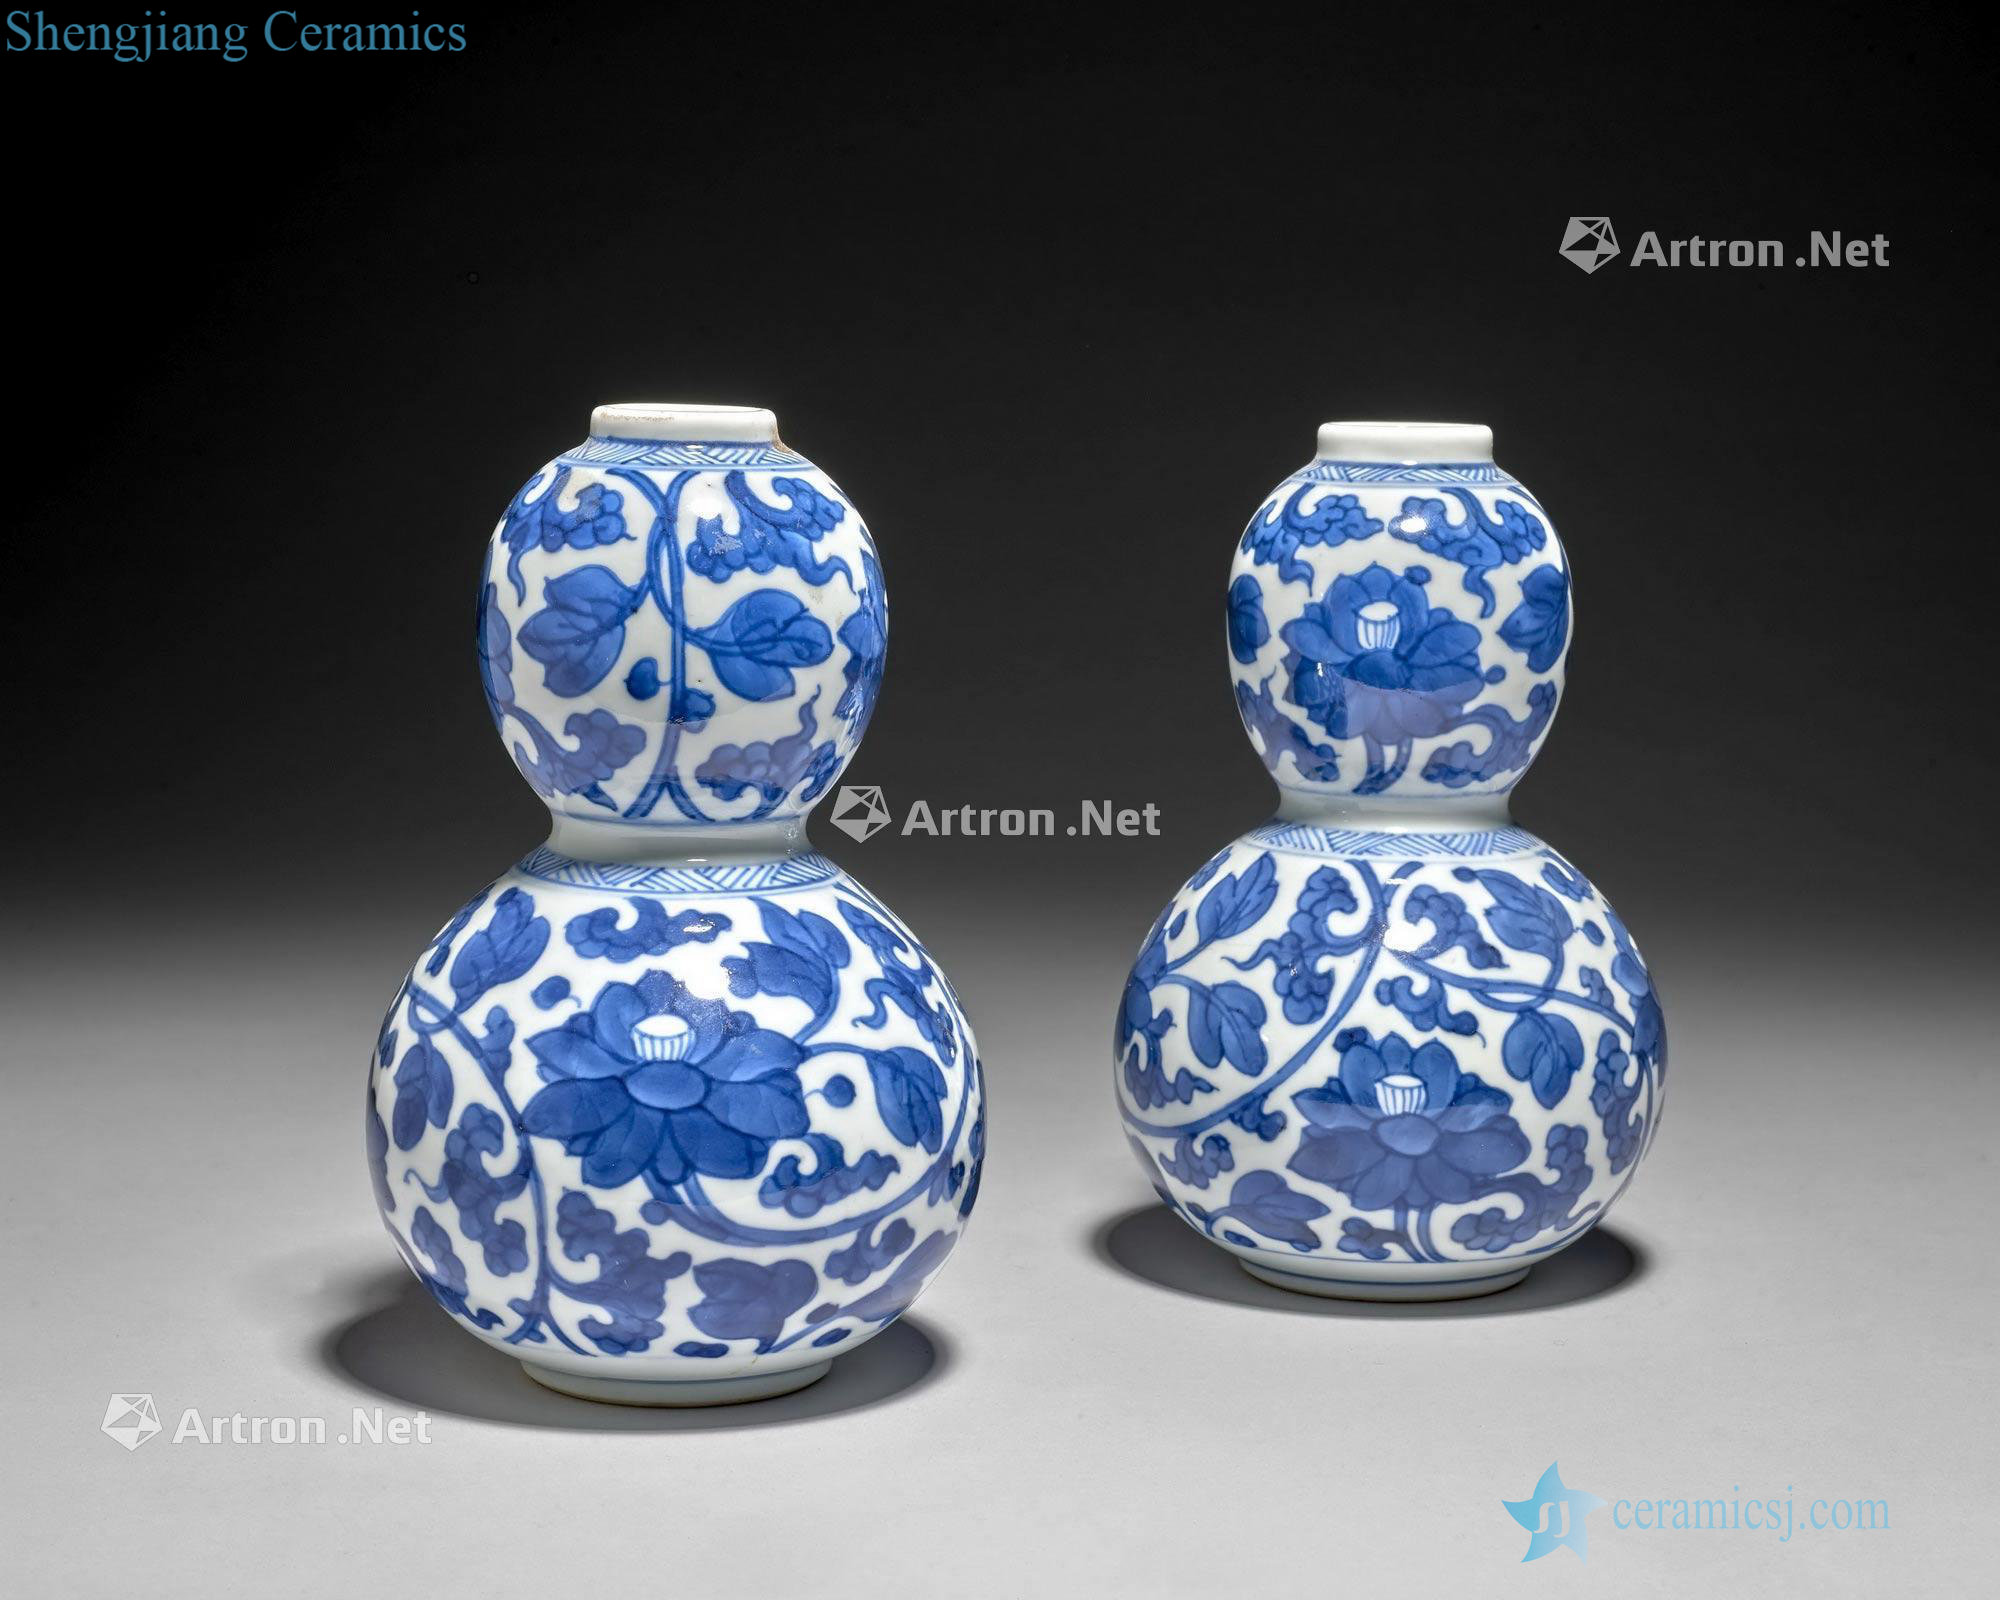 China, the Qing dynasty, Kangxi period (1662-1722), A pair of blue and white double - gourd vases